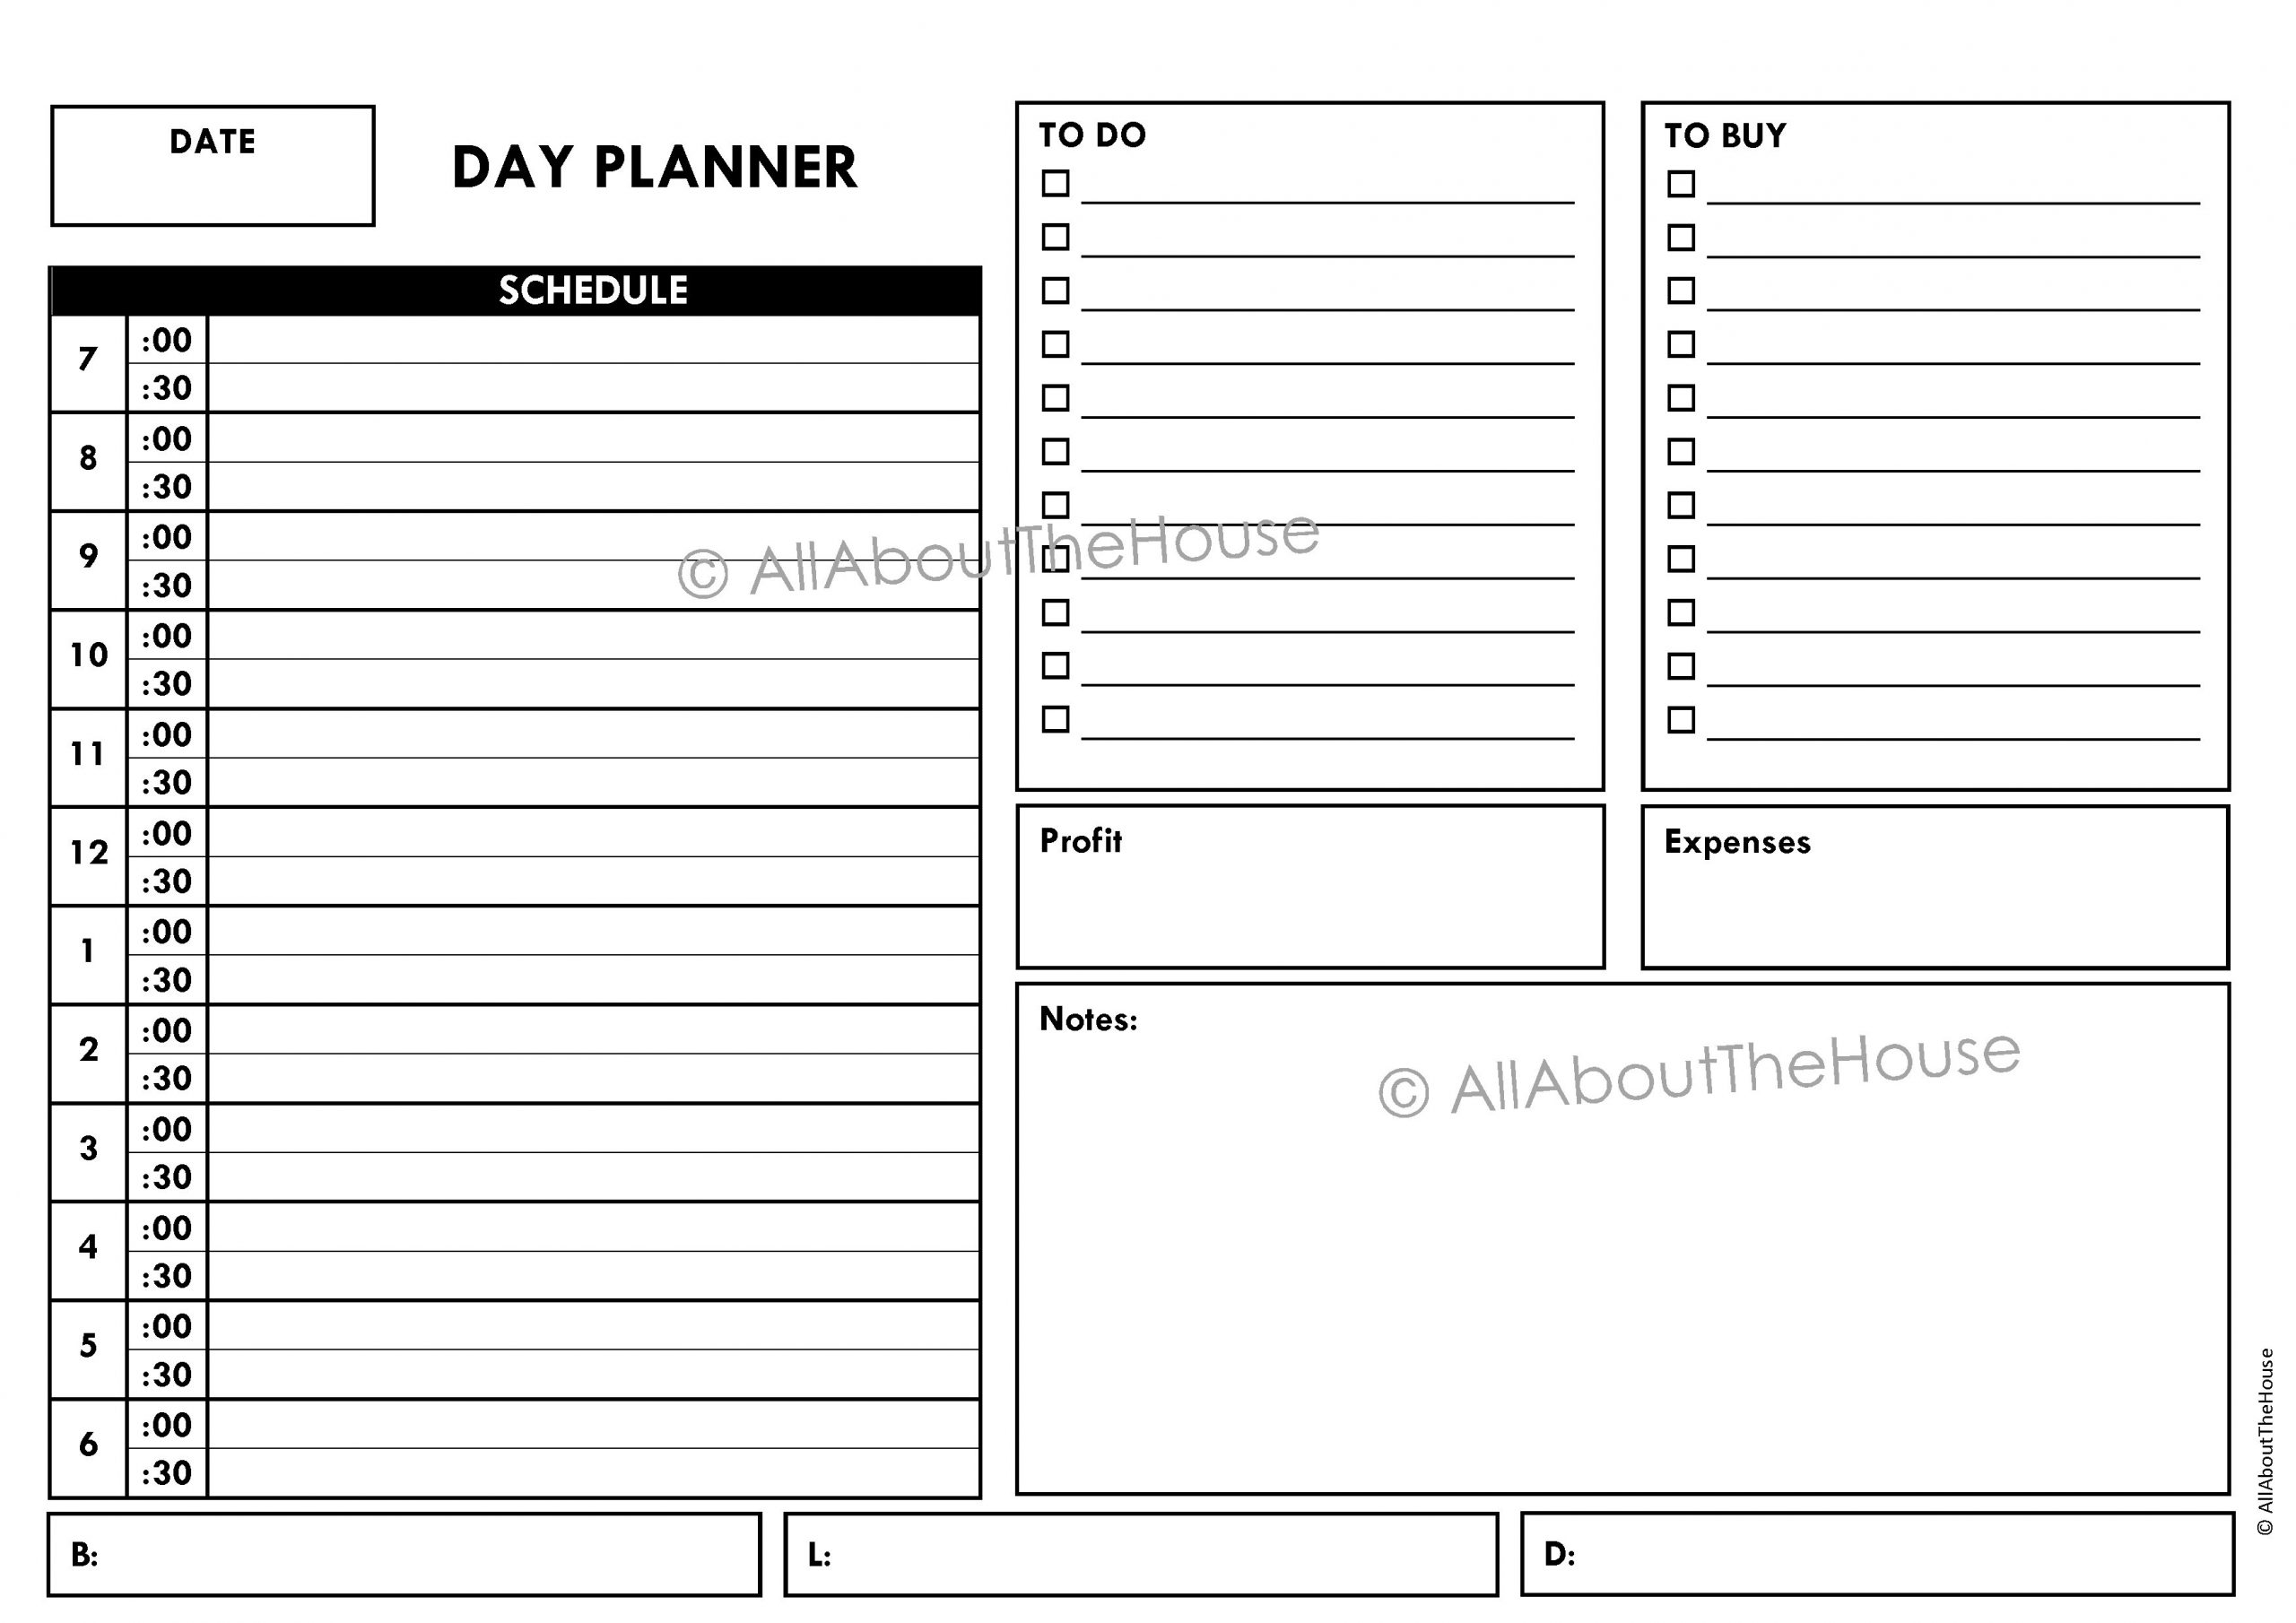 Workday Planner | Allaboutthehouse Printables